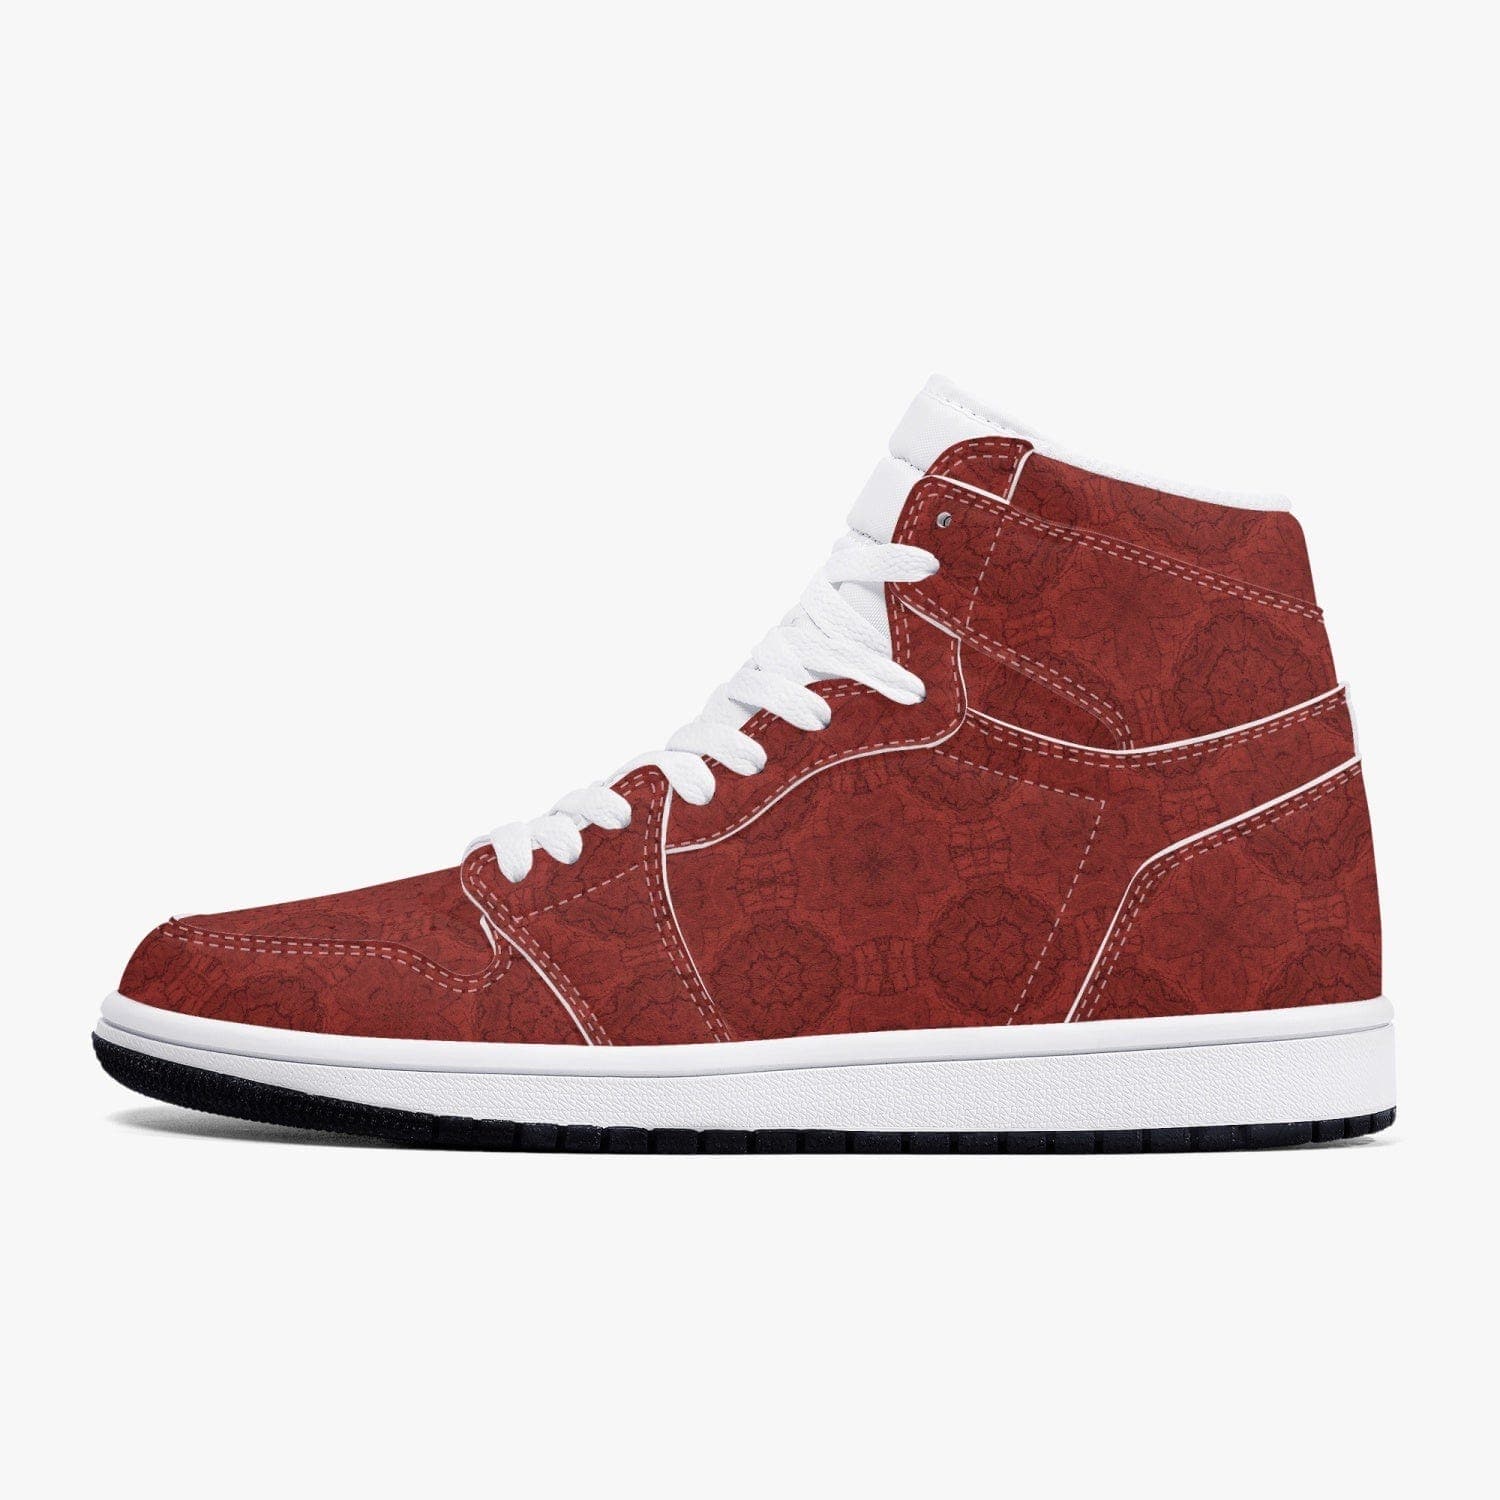 Red High-Top Leather Mesh Lining Soft EVA Padded Insoles Sneakers with Exceptional Durability for Men and Women, designed by Sensus Studio Design